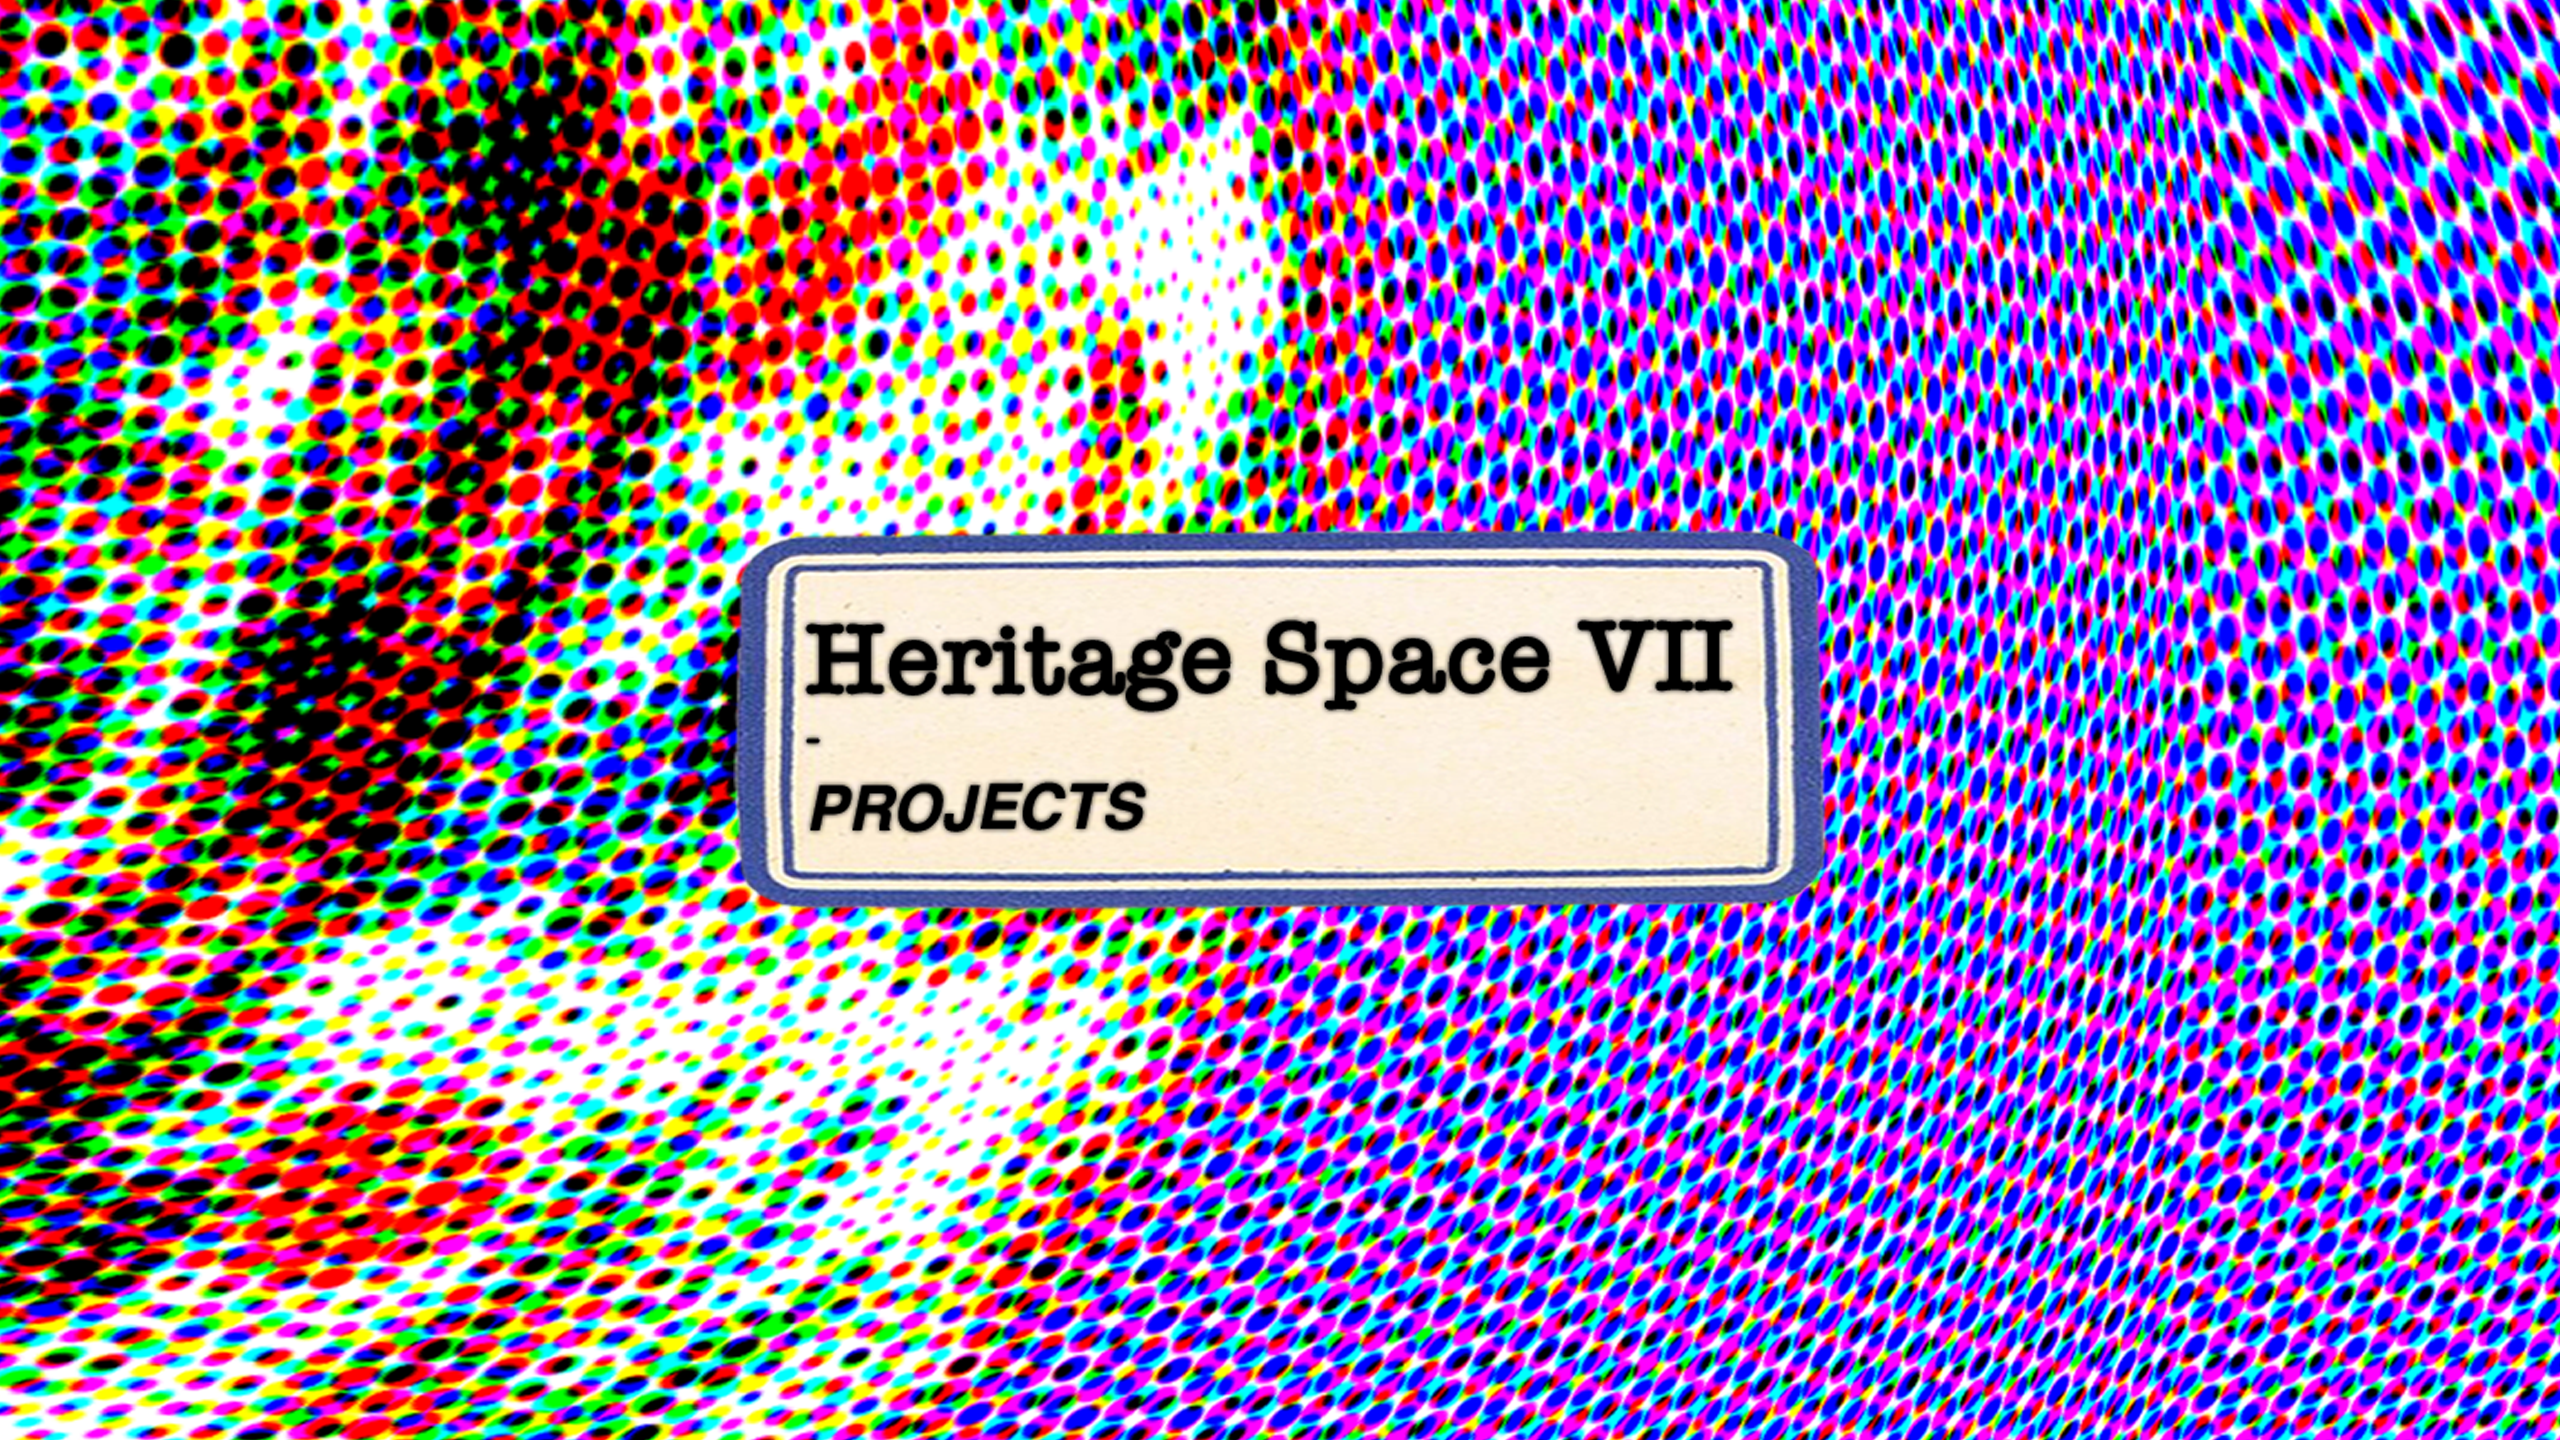 HERITAGE SPACE VII – BENEFICIARIES ANNOUNCED